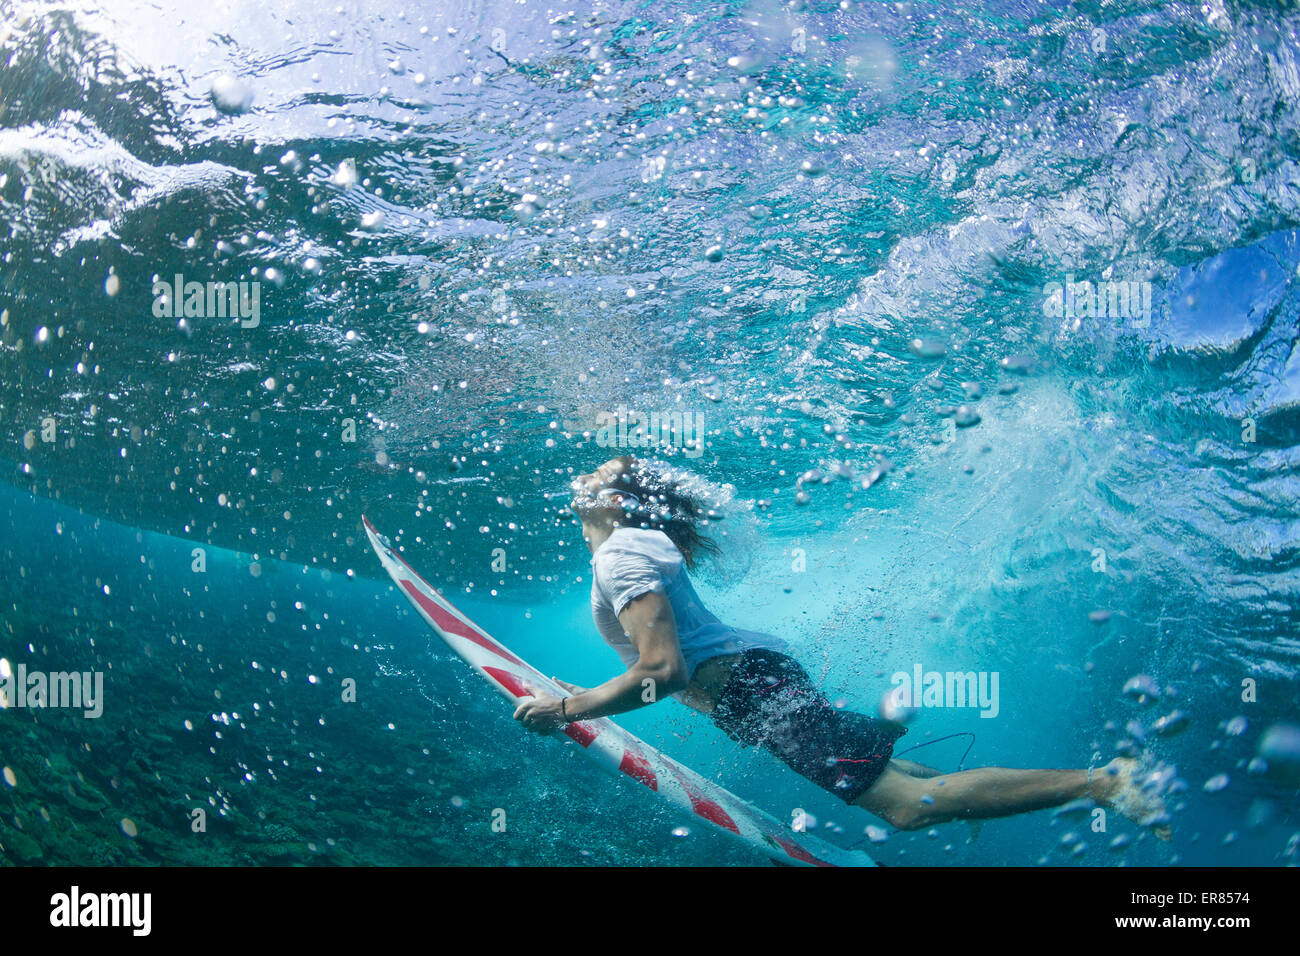 Underwater view of a surfer duck diving under a wave Stock Photo